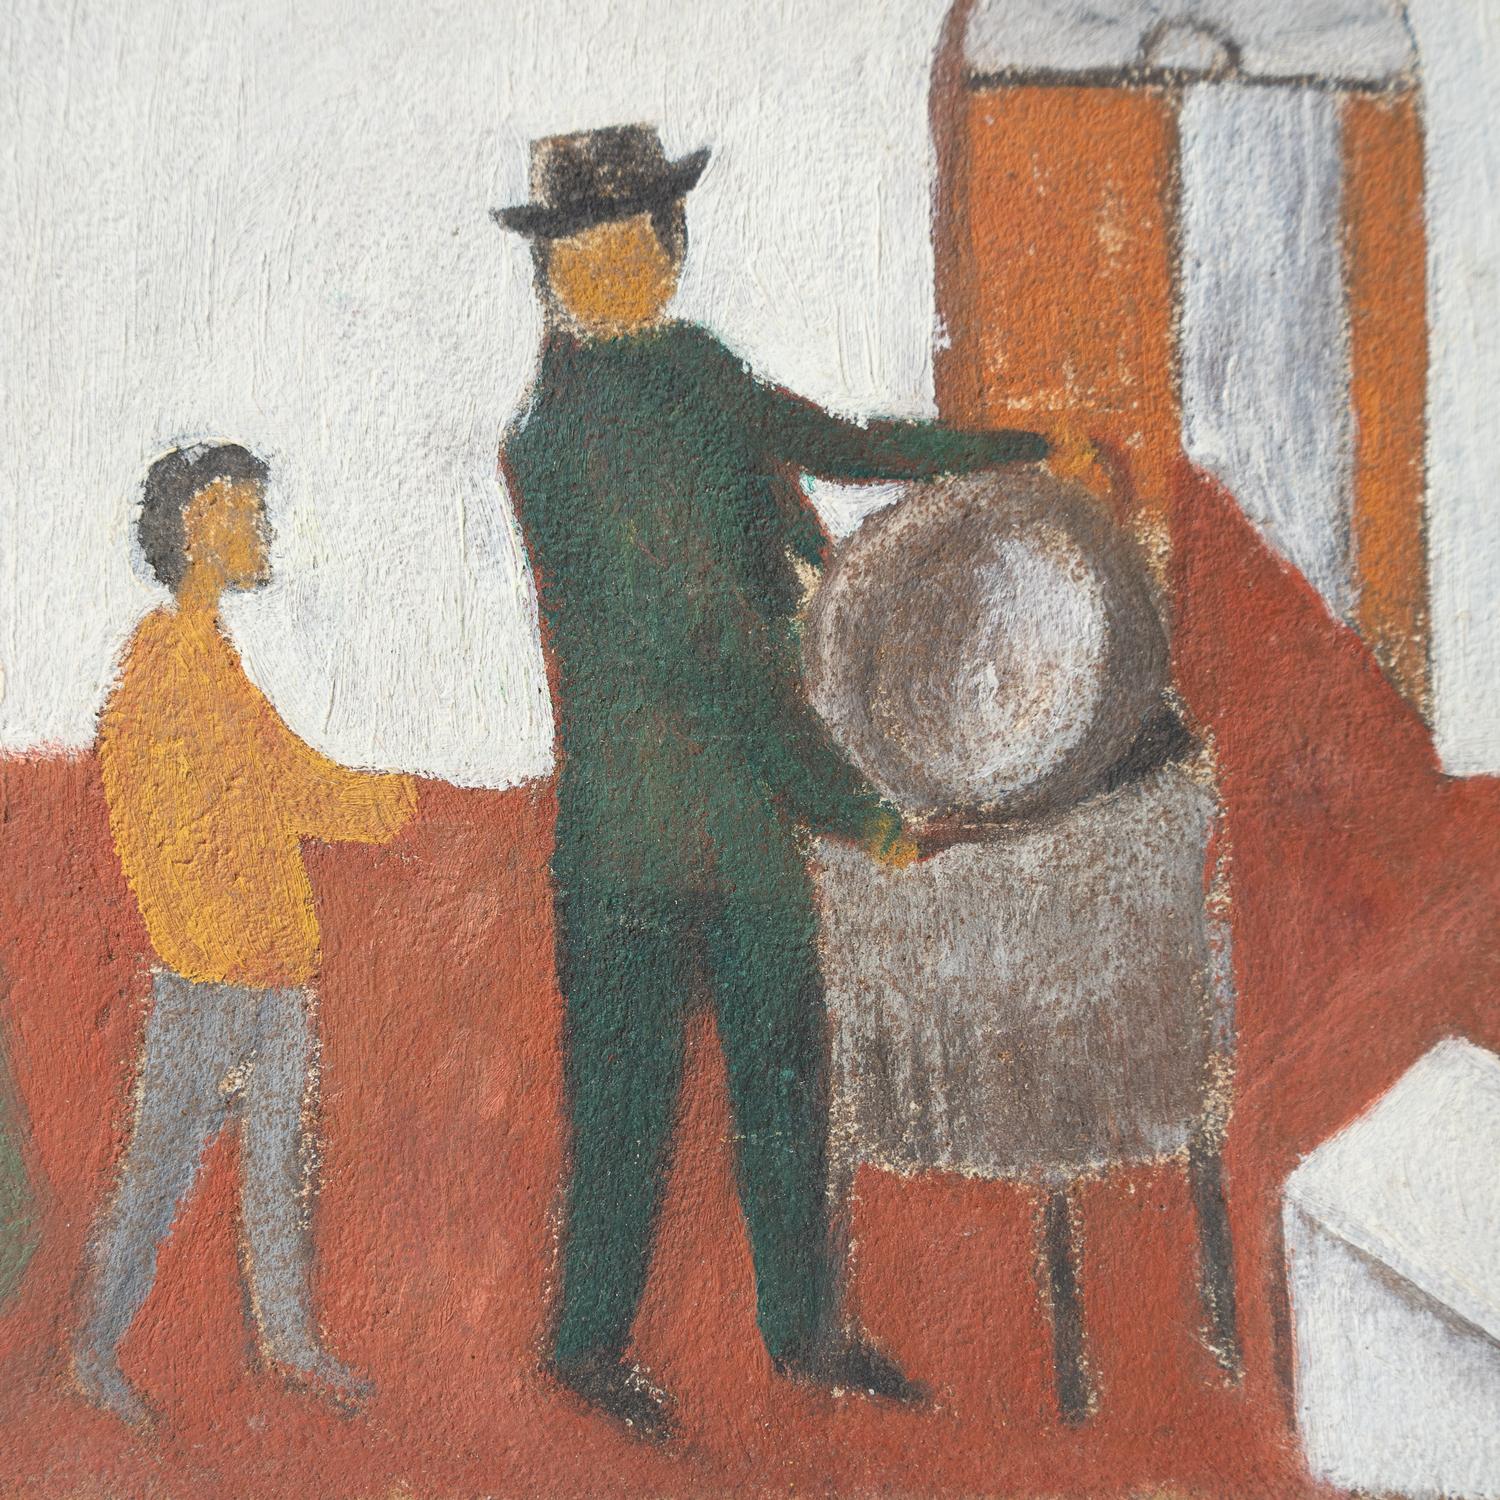 Hand-Painted Figures in an Interior, Original Italian Expressionist Mid Century Oil Painting